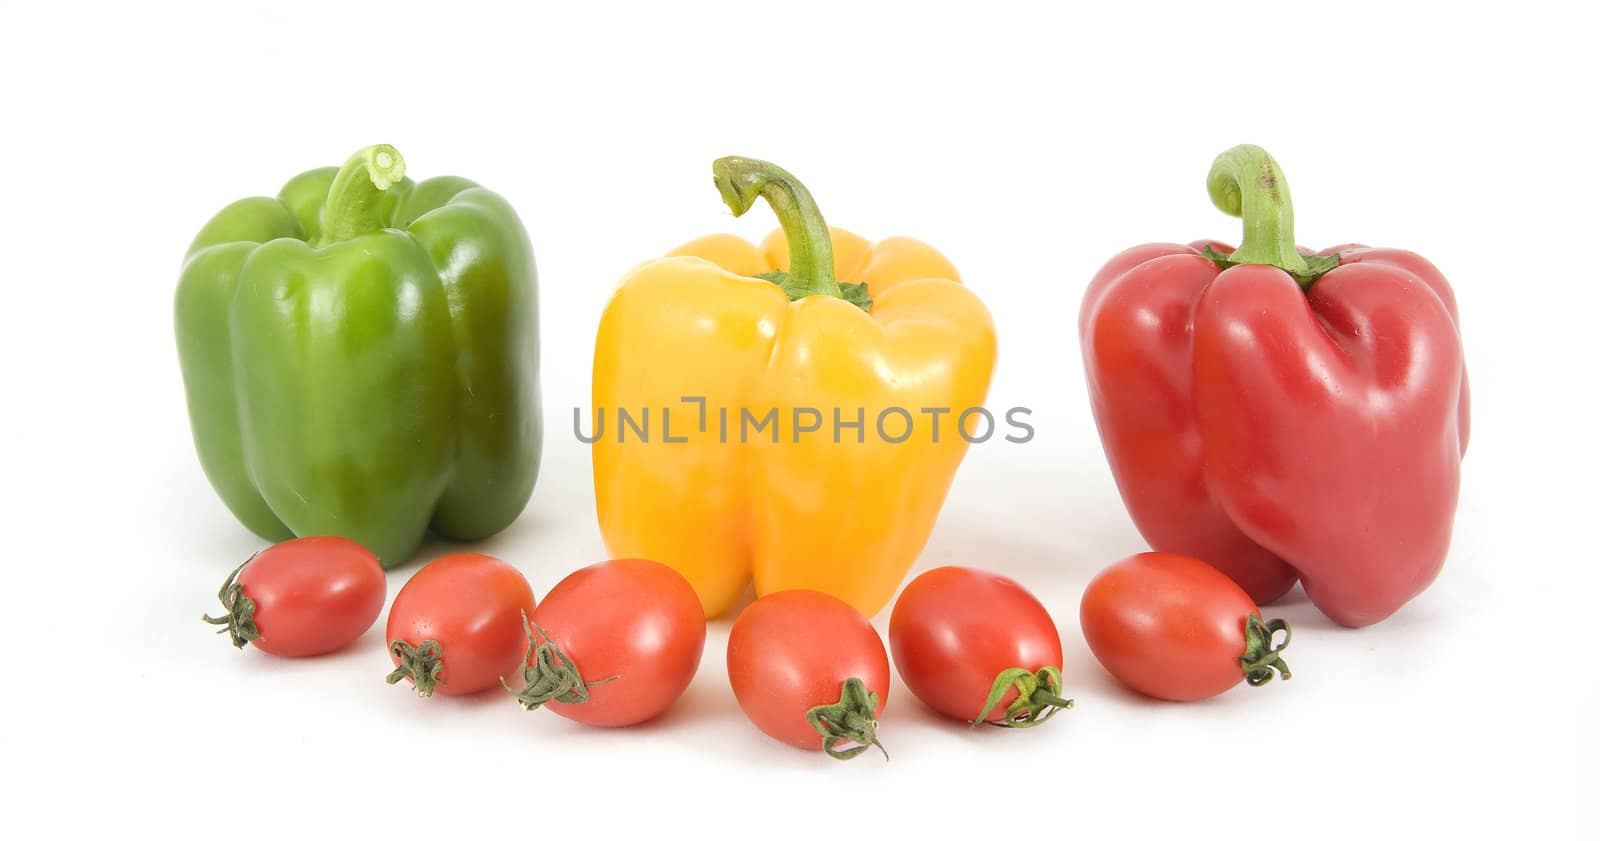 sweet peppers and tomatoes on white background